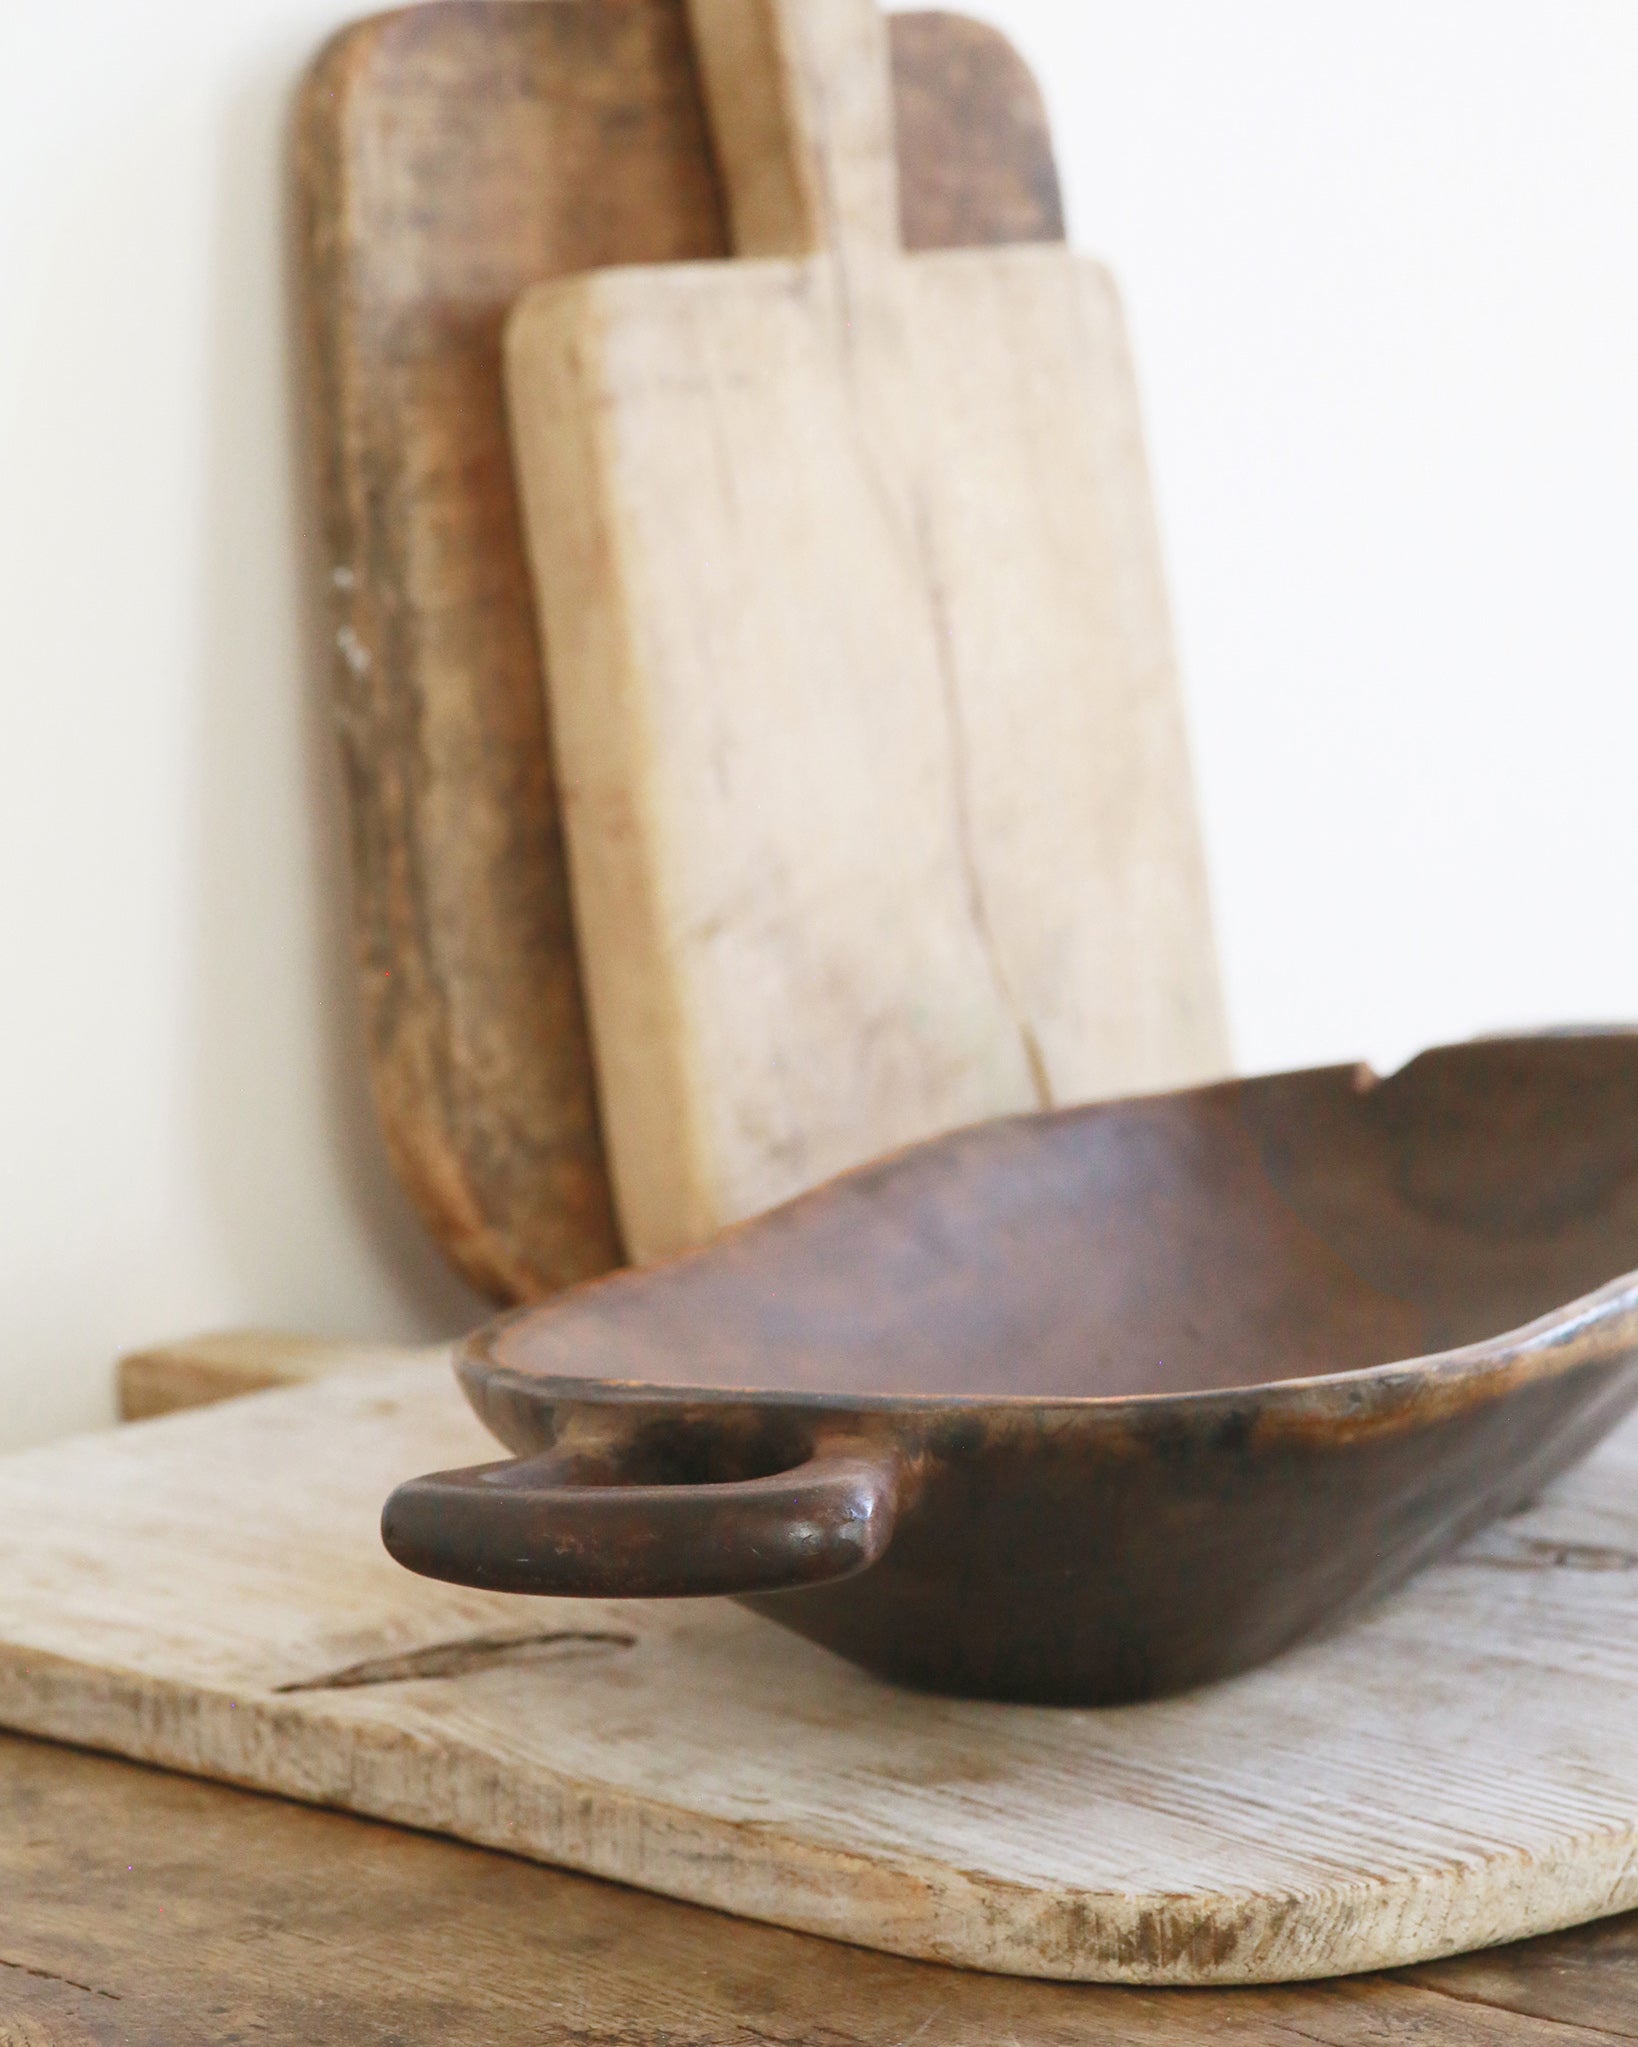 Dark wooden polished bowl with kitchen styling